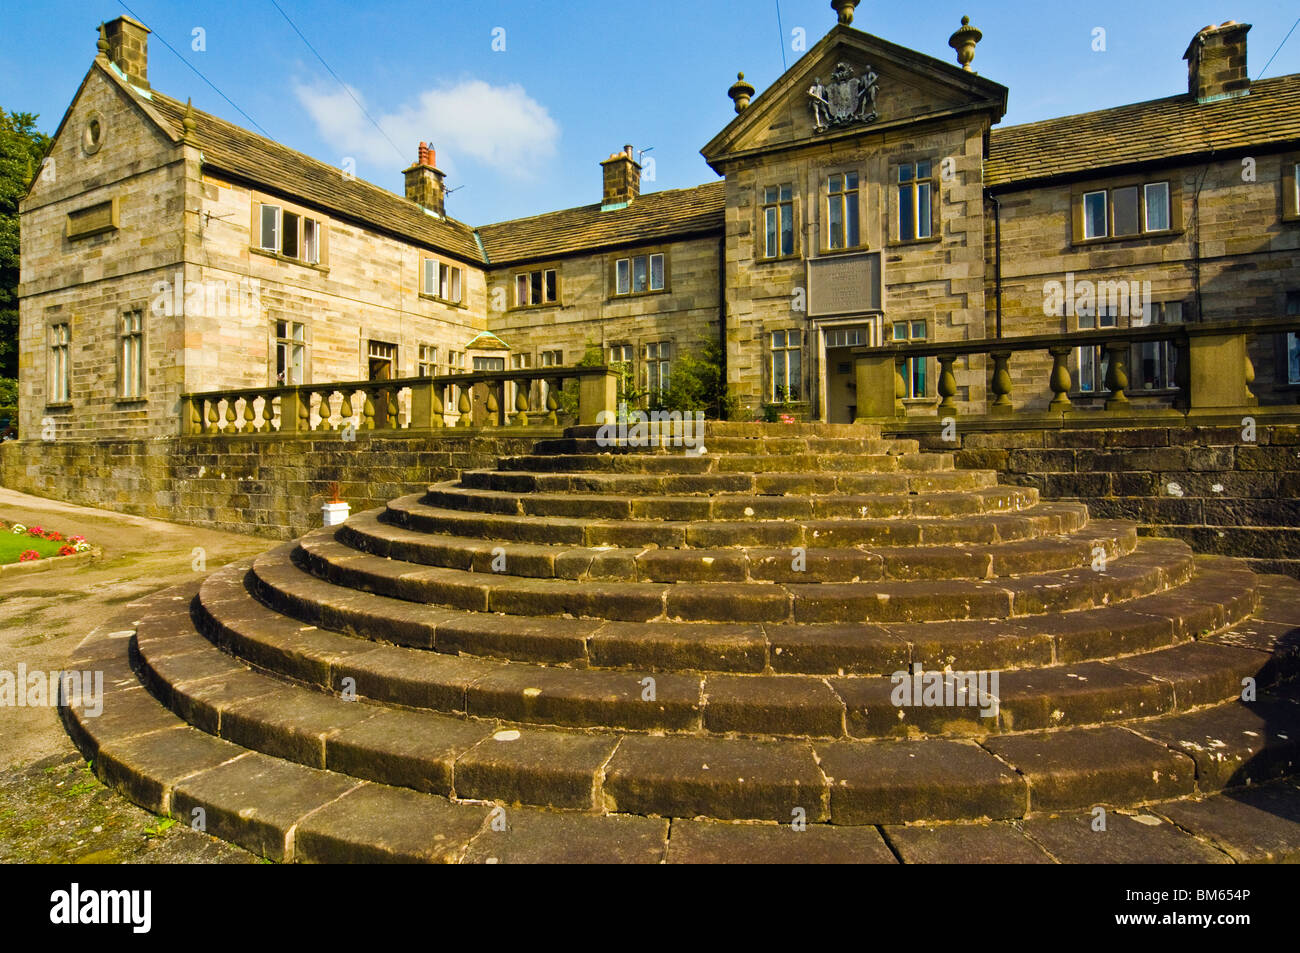 The Shireburn Almshouses at Hurst Green in the Ribble Valley Lancashire England Stock Photo